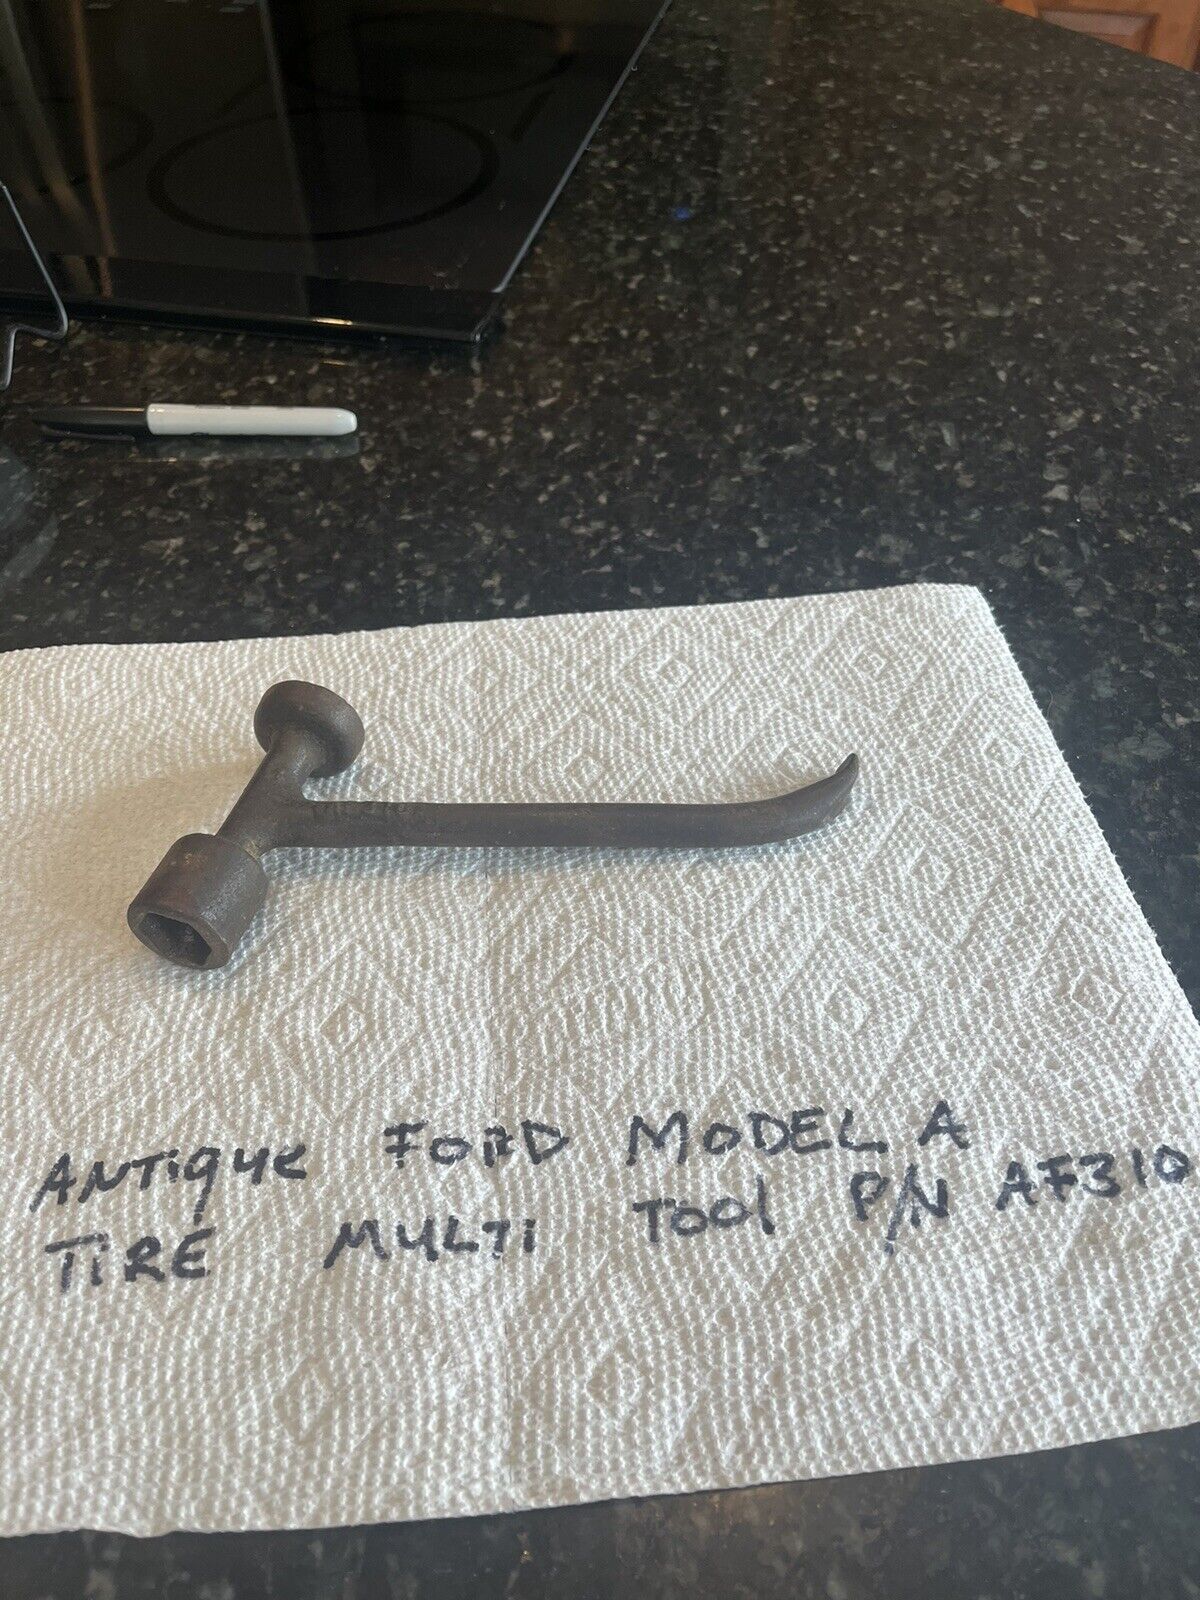 Rare Antique Ford Model A Tire Multi Tool # AF310